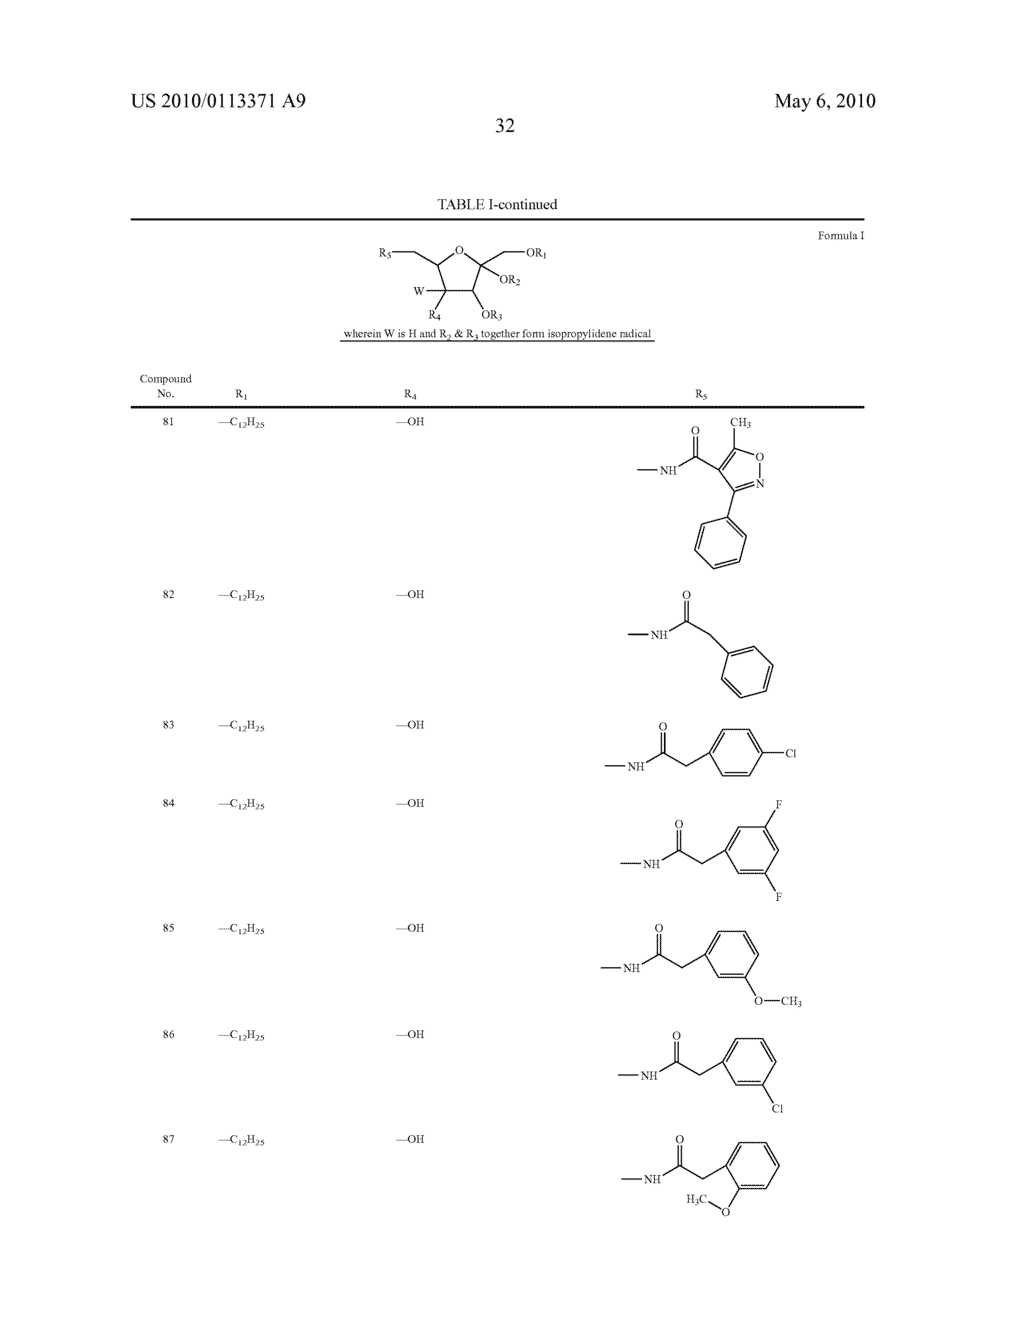 Derivatives Of Pentose Monosaccharides As Anti-Inflammatory Compounds - diagram, schematic, and image 33